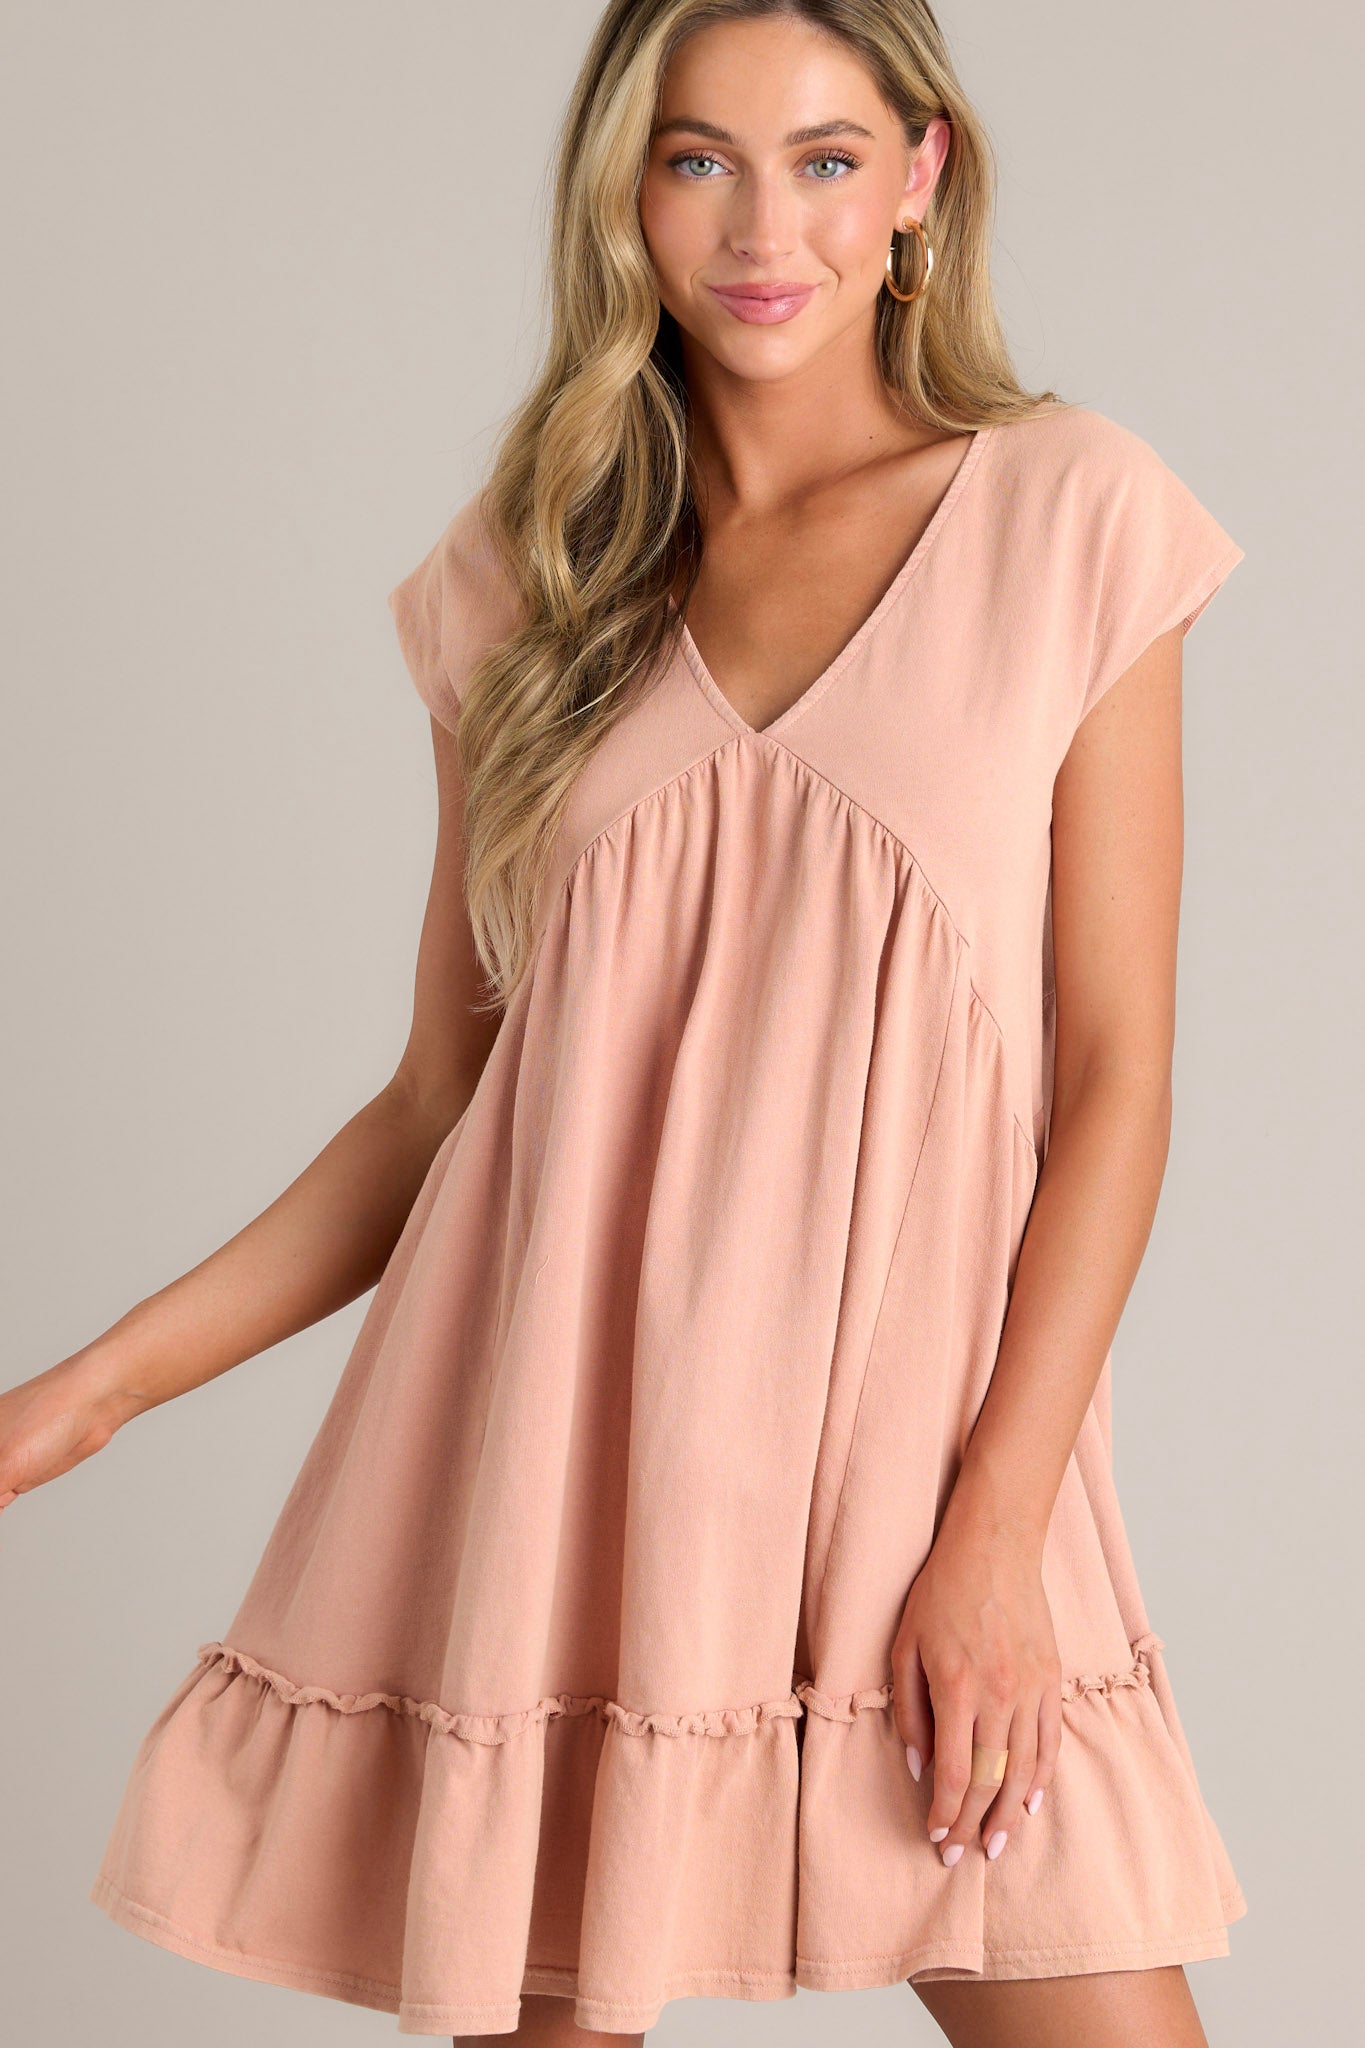 This peach mini dress features a v-neckline, ruching below the bust line, and short cap sleeves.